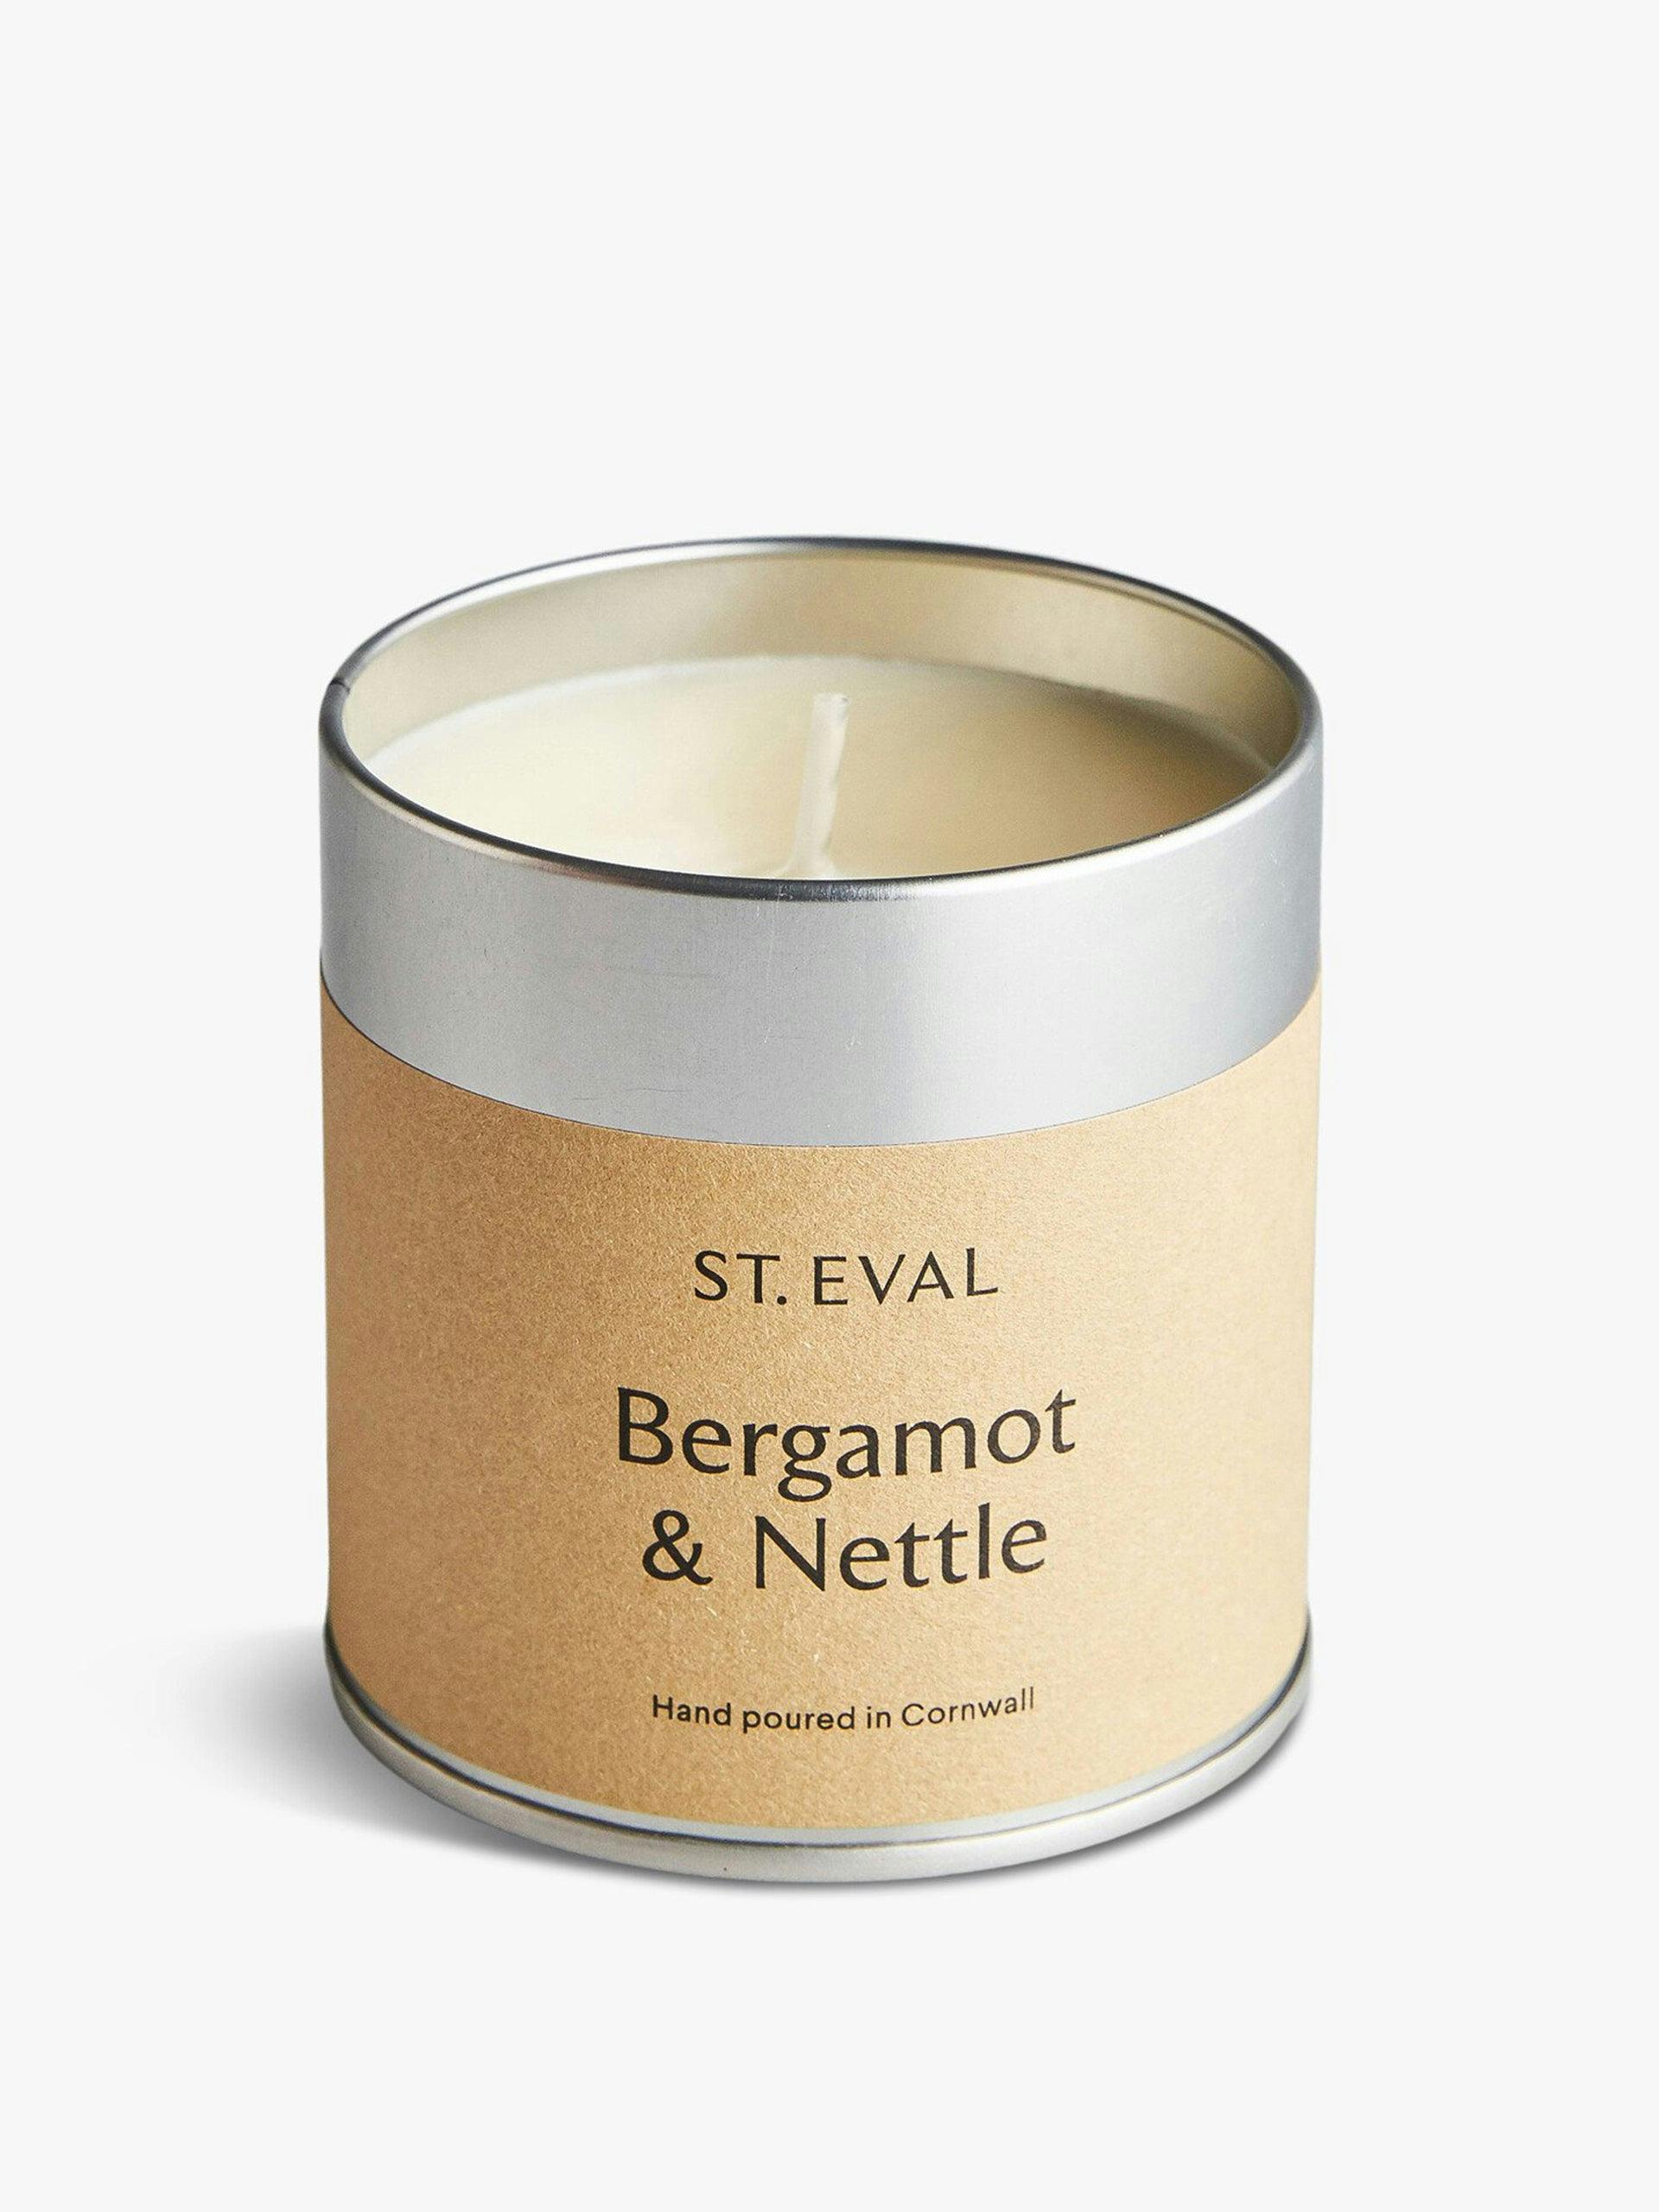 Bergamot and nettle scented candle